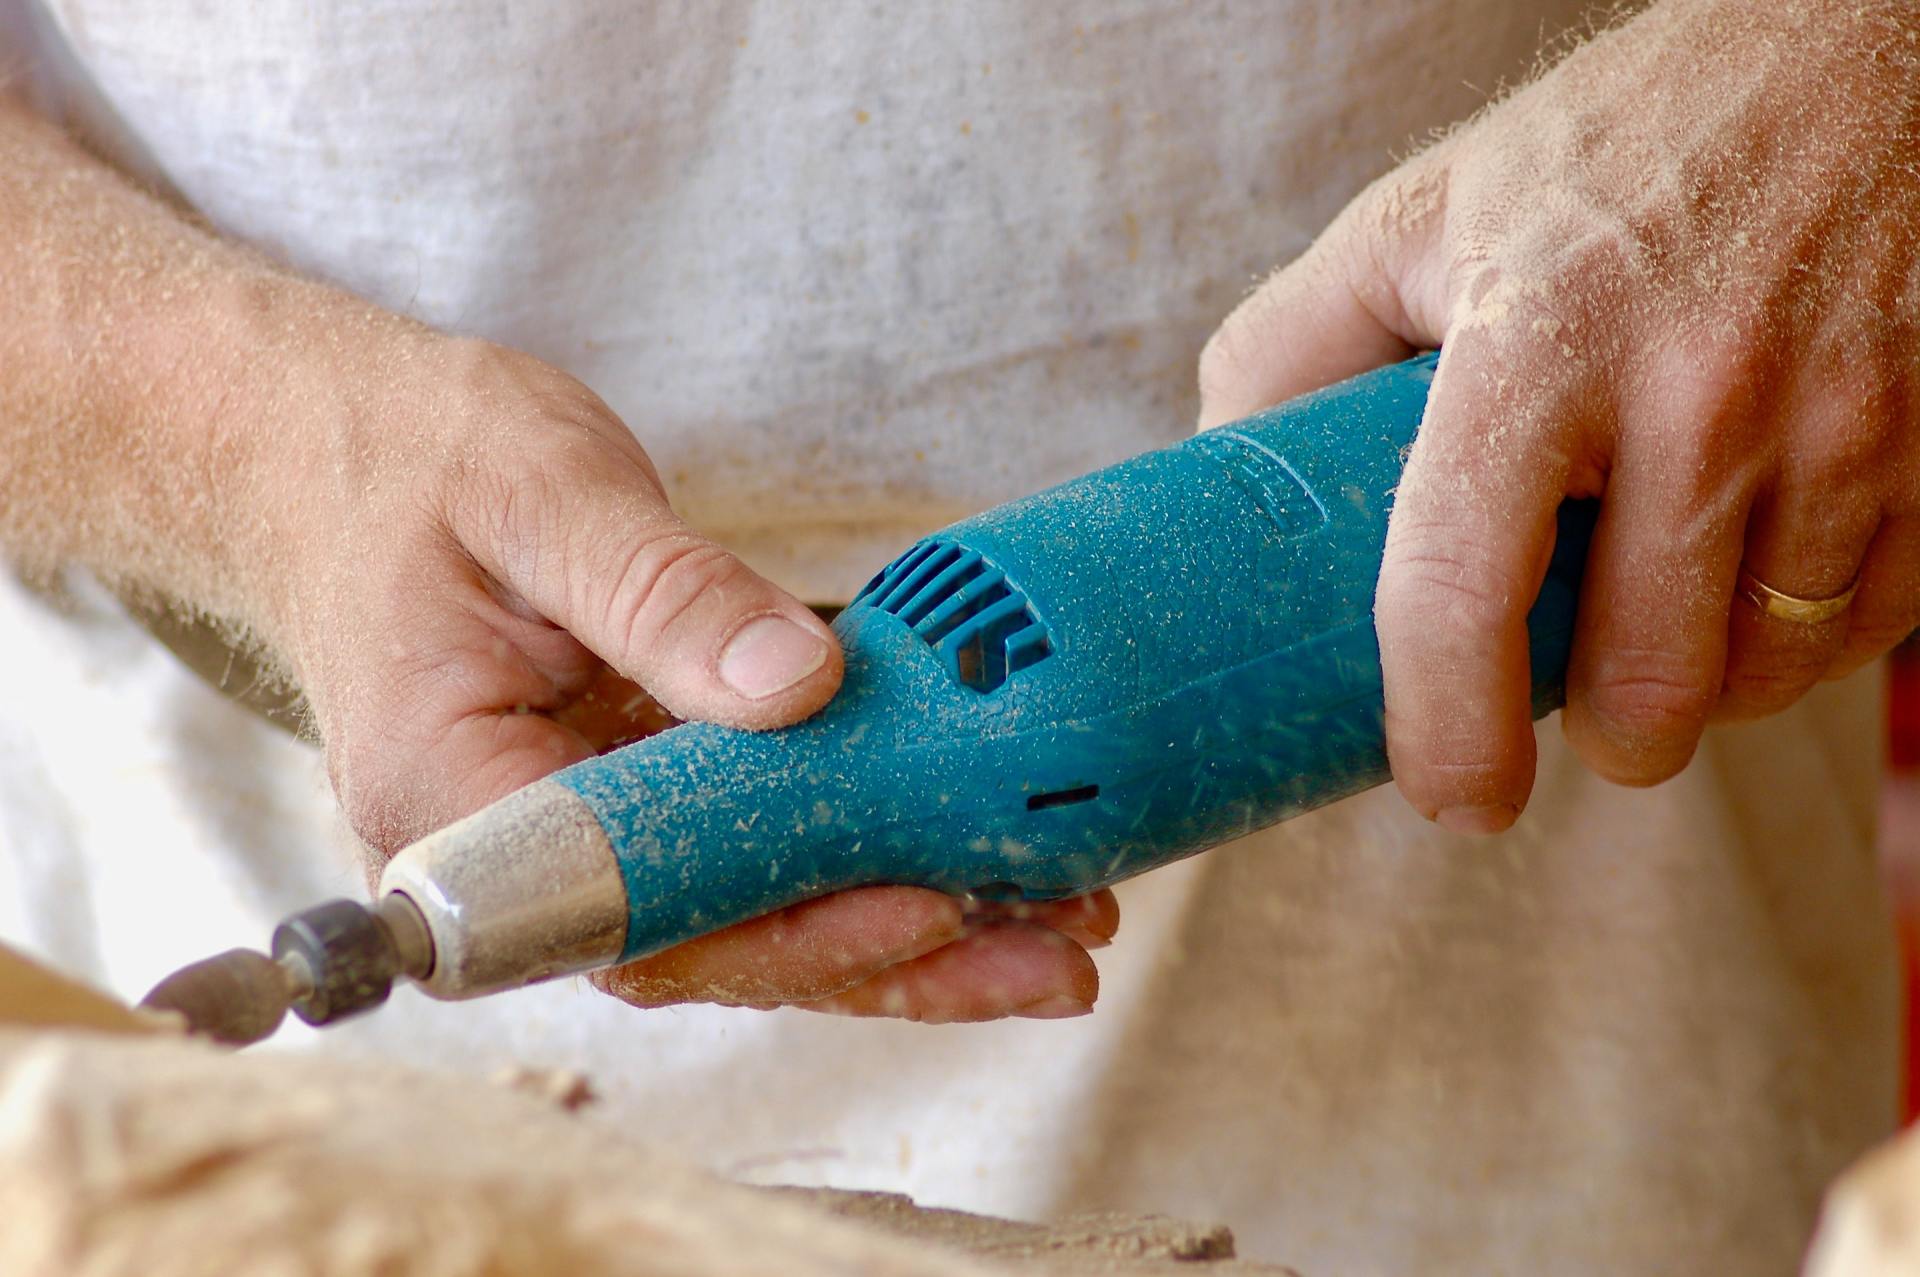 A vibrating hand tool can produce symptoms of carpal tunnel syndrome.